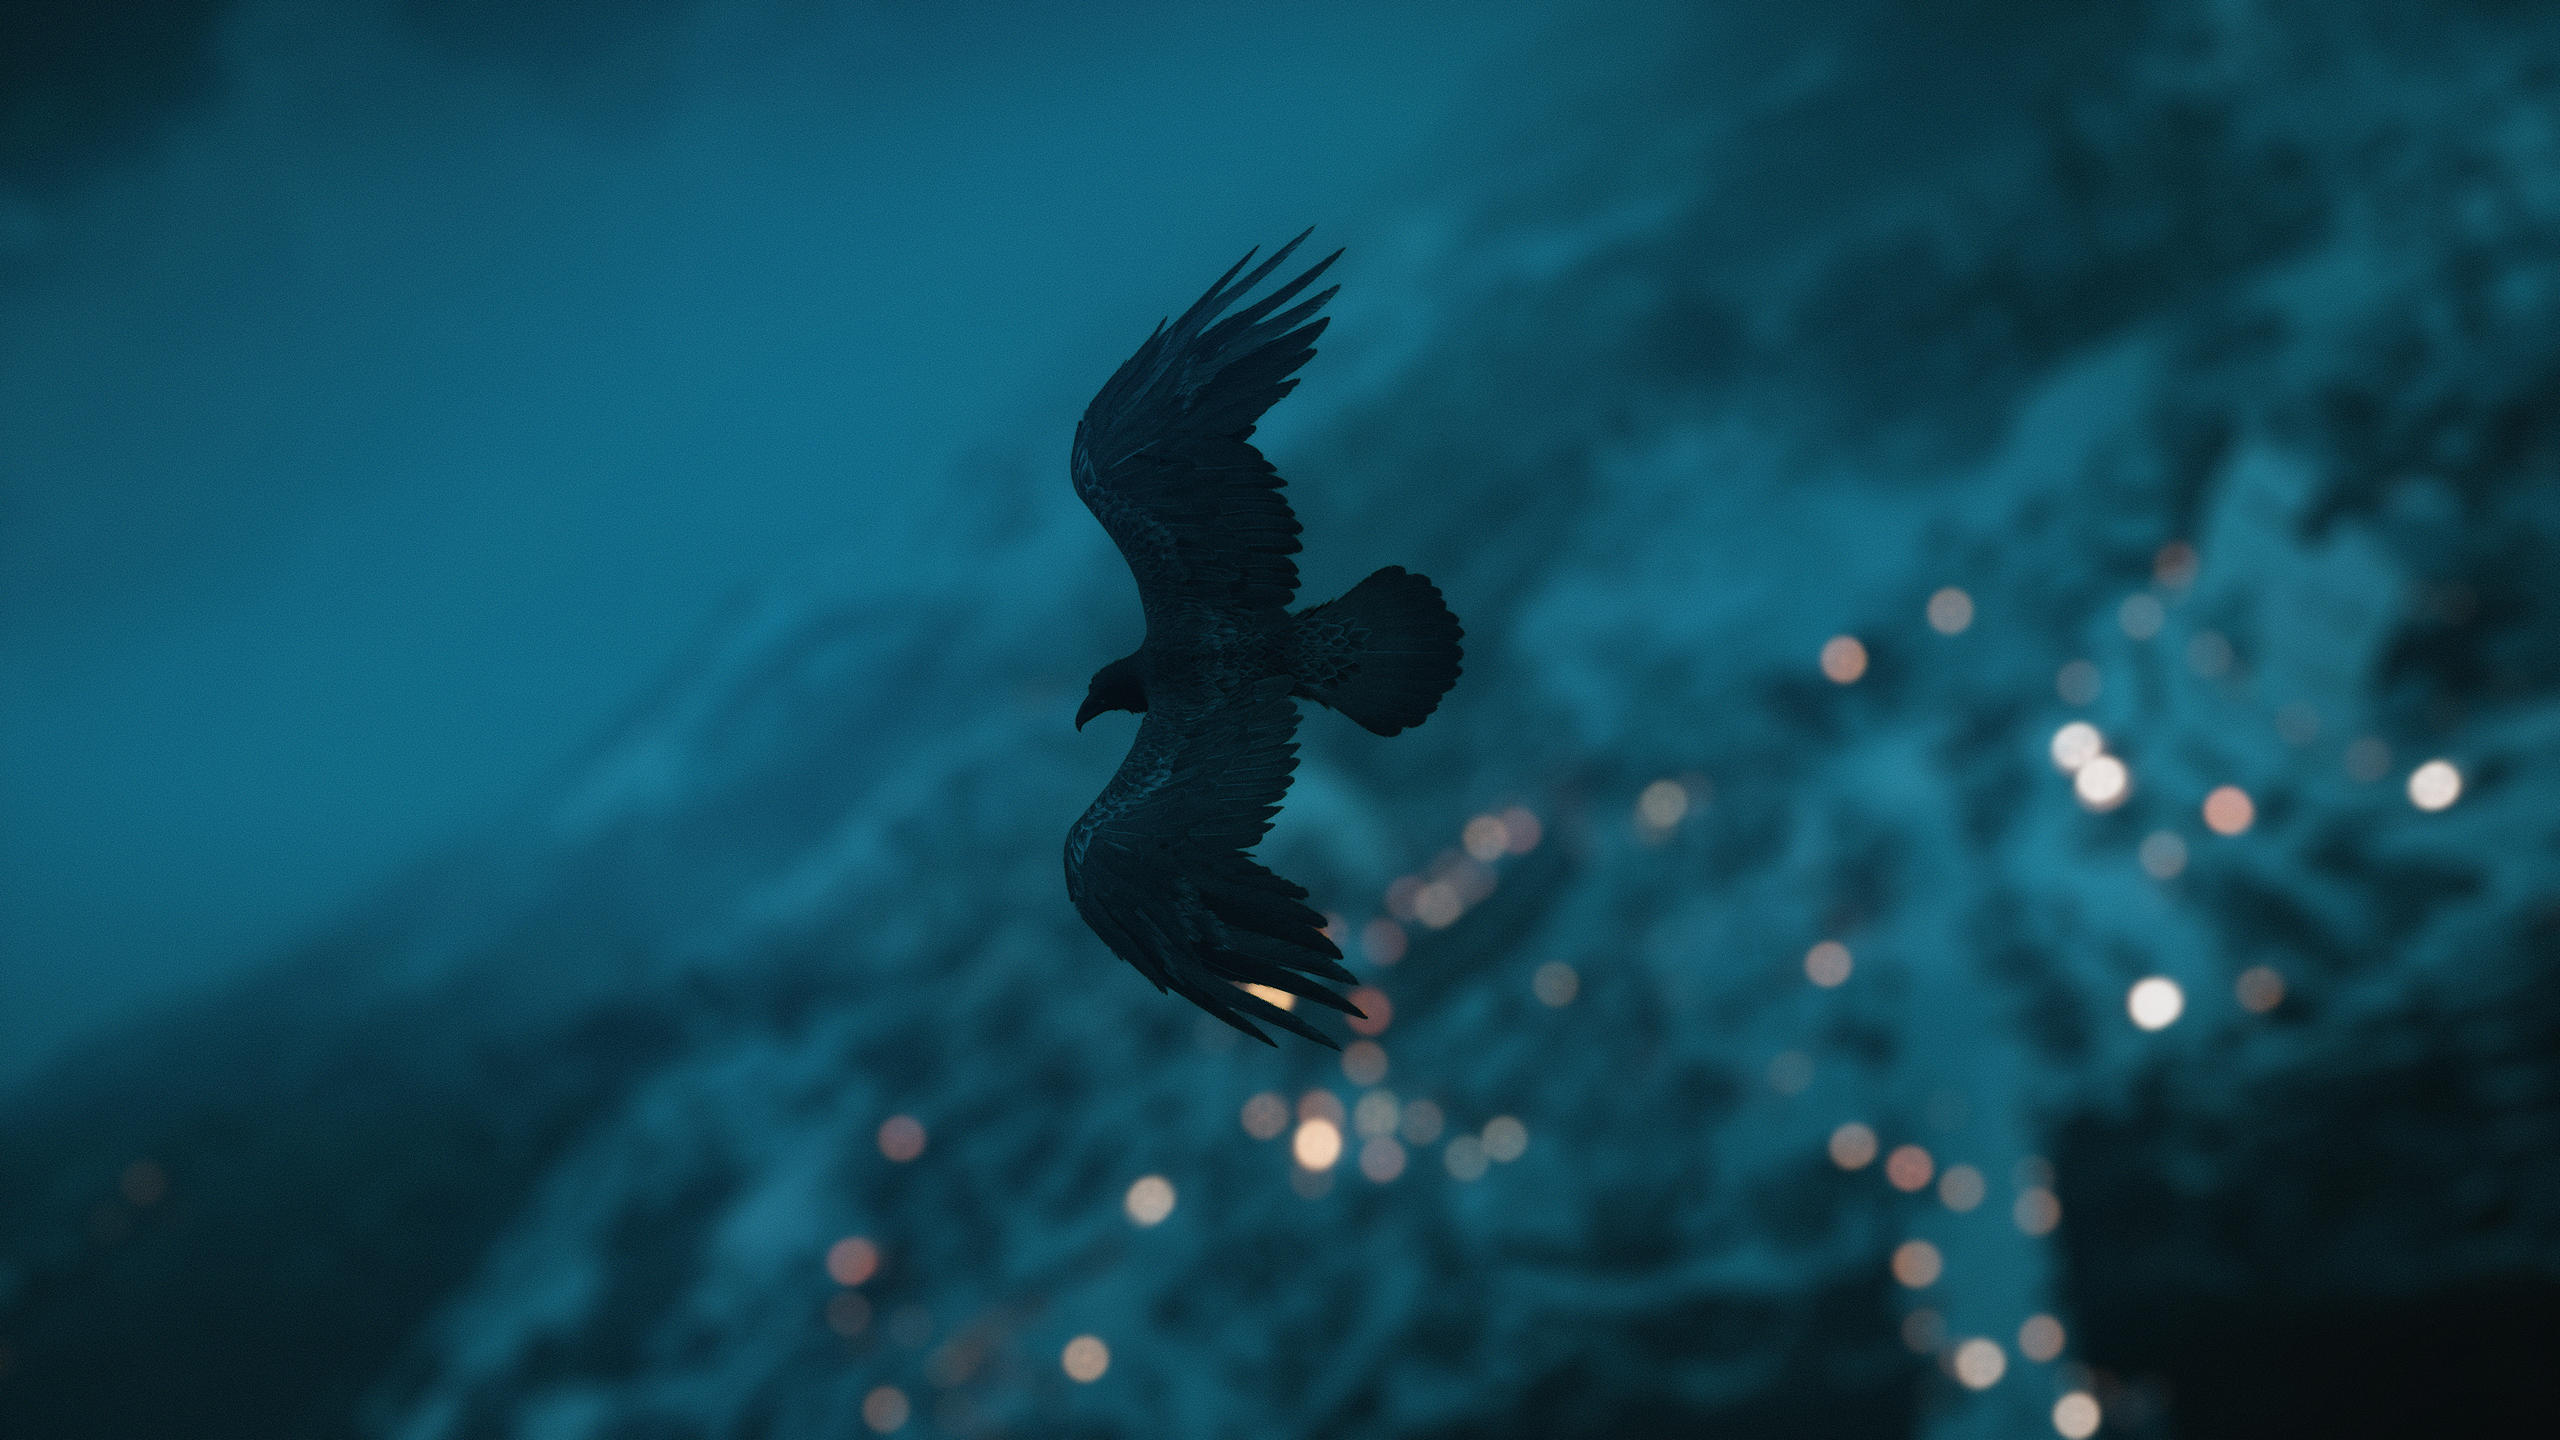 General 2560x1440 Assassin's Creed: Valhalla reshade forest full moon fall snow winter raven night